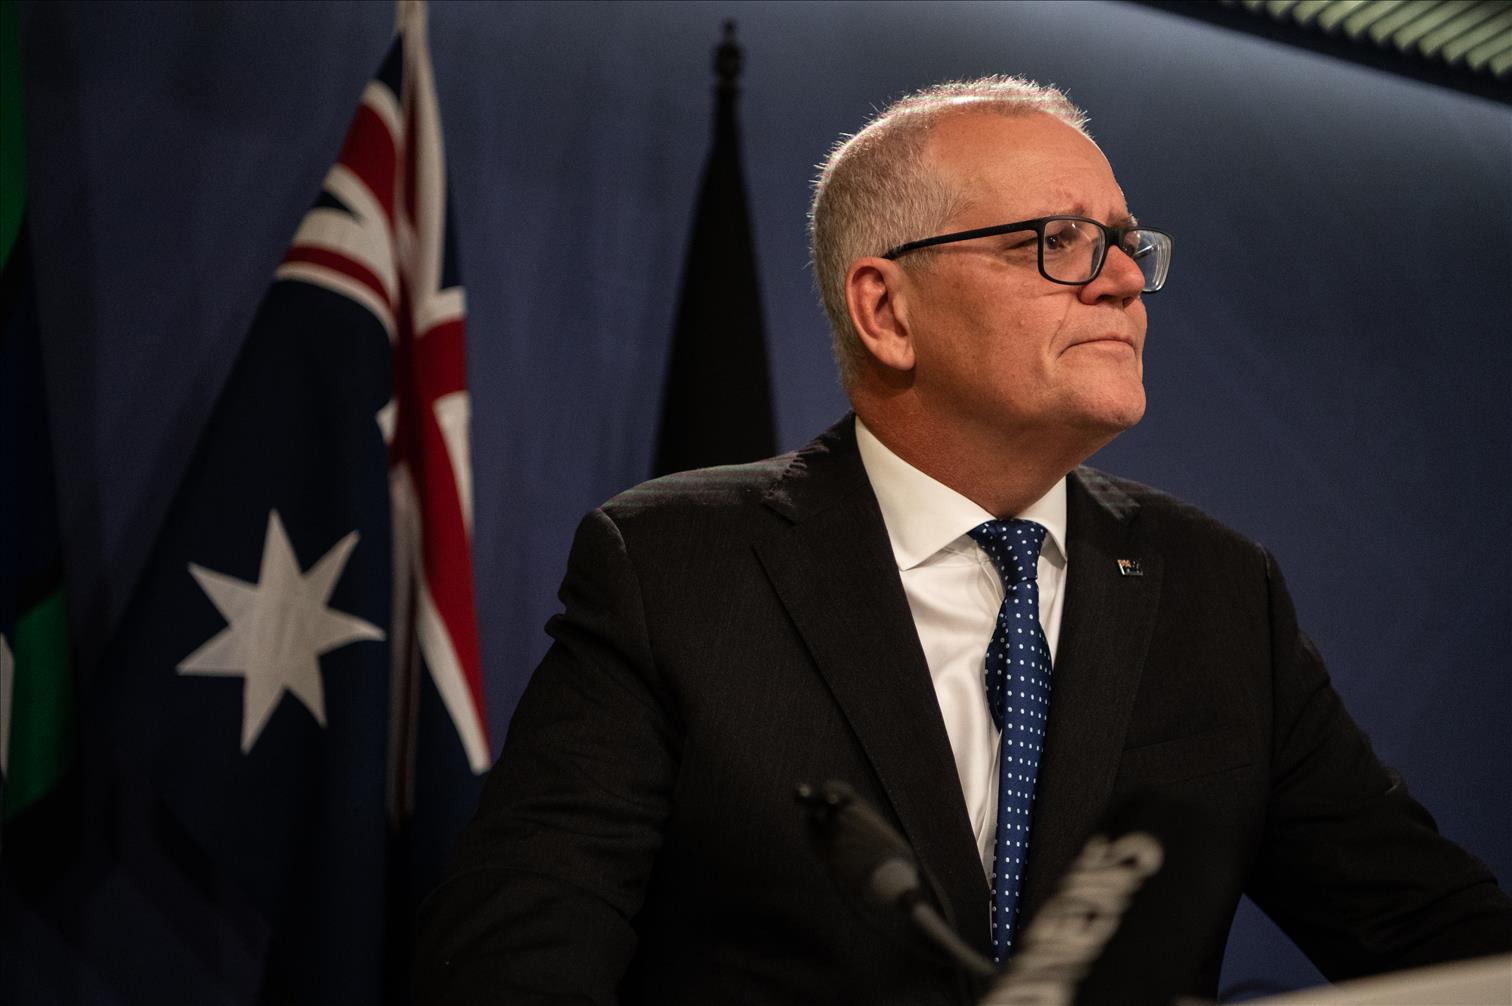 VIDEO: Morrison, Hurley And All Those Ministries